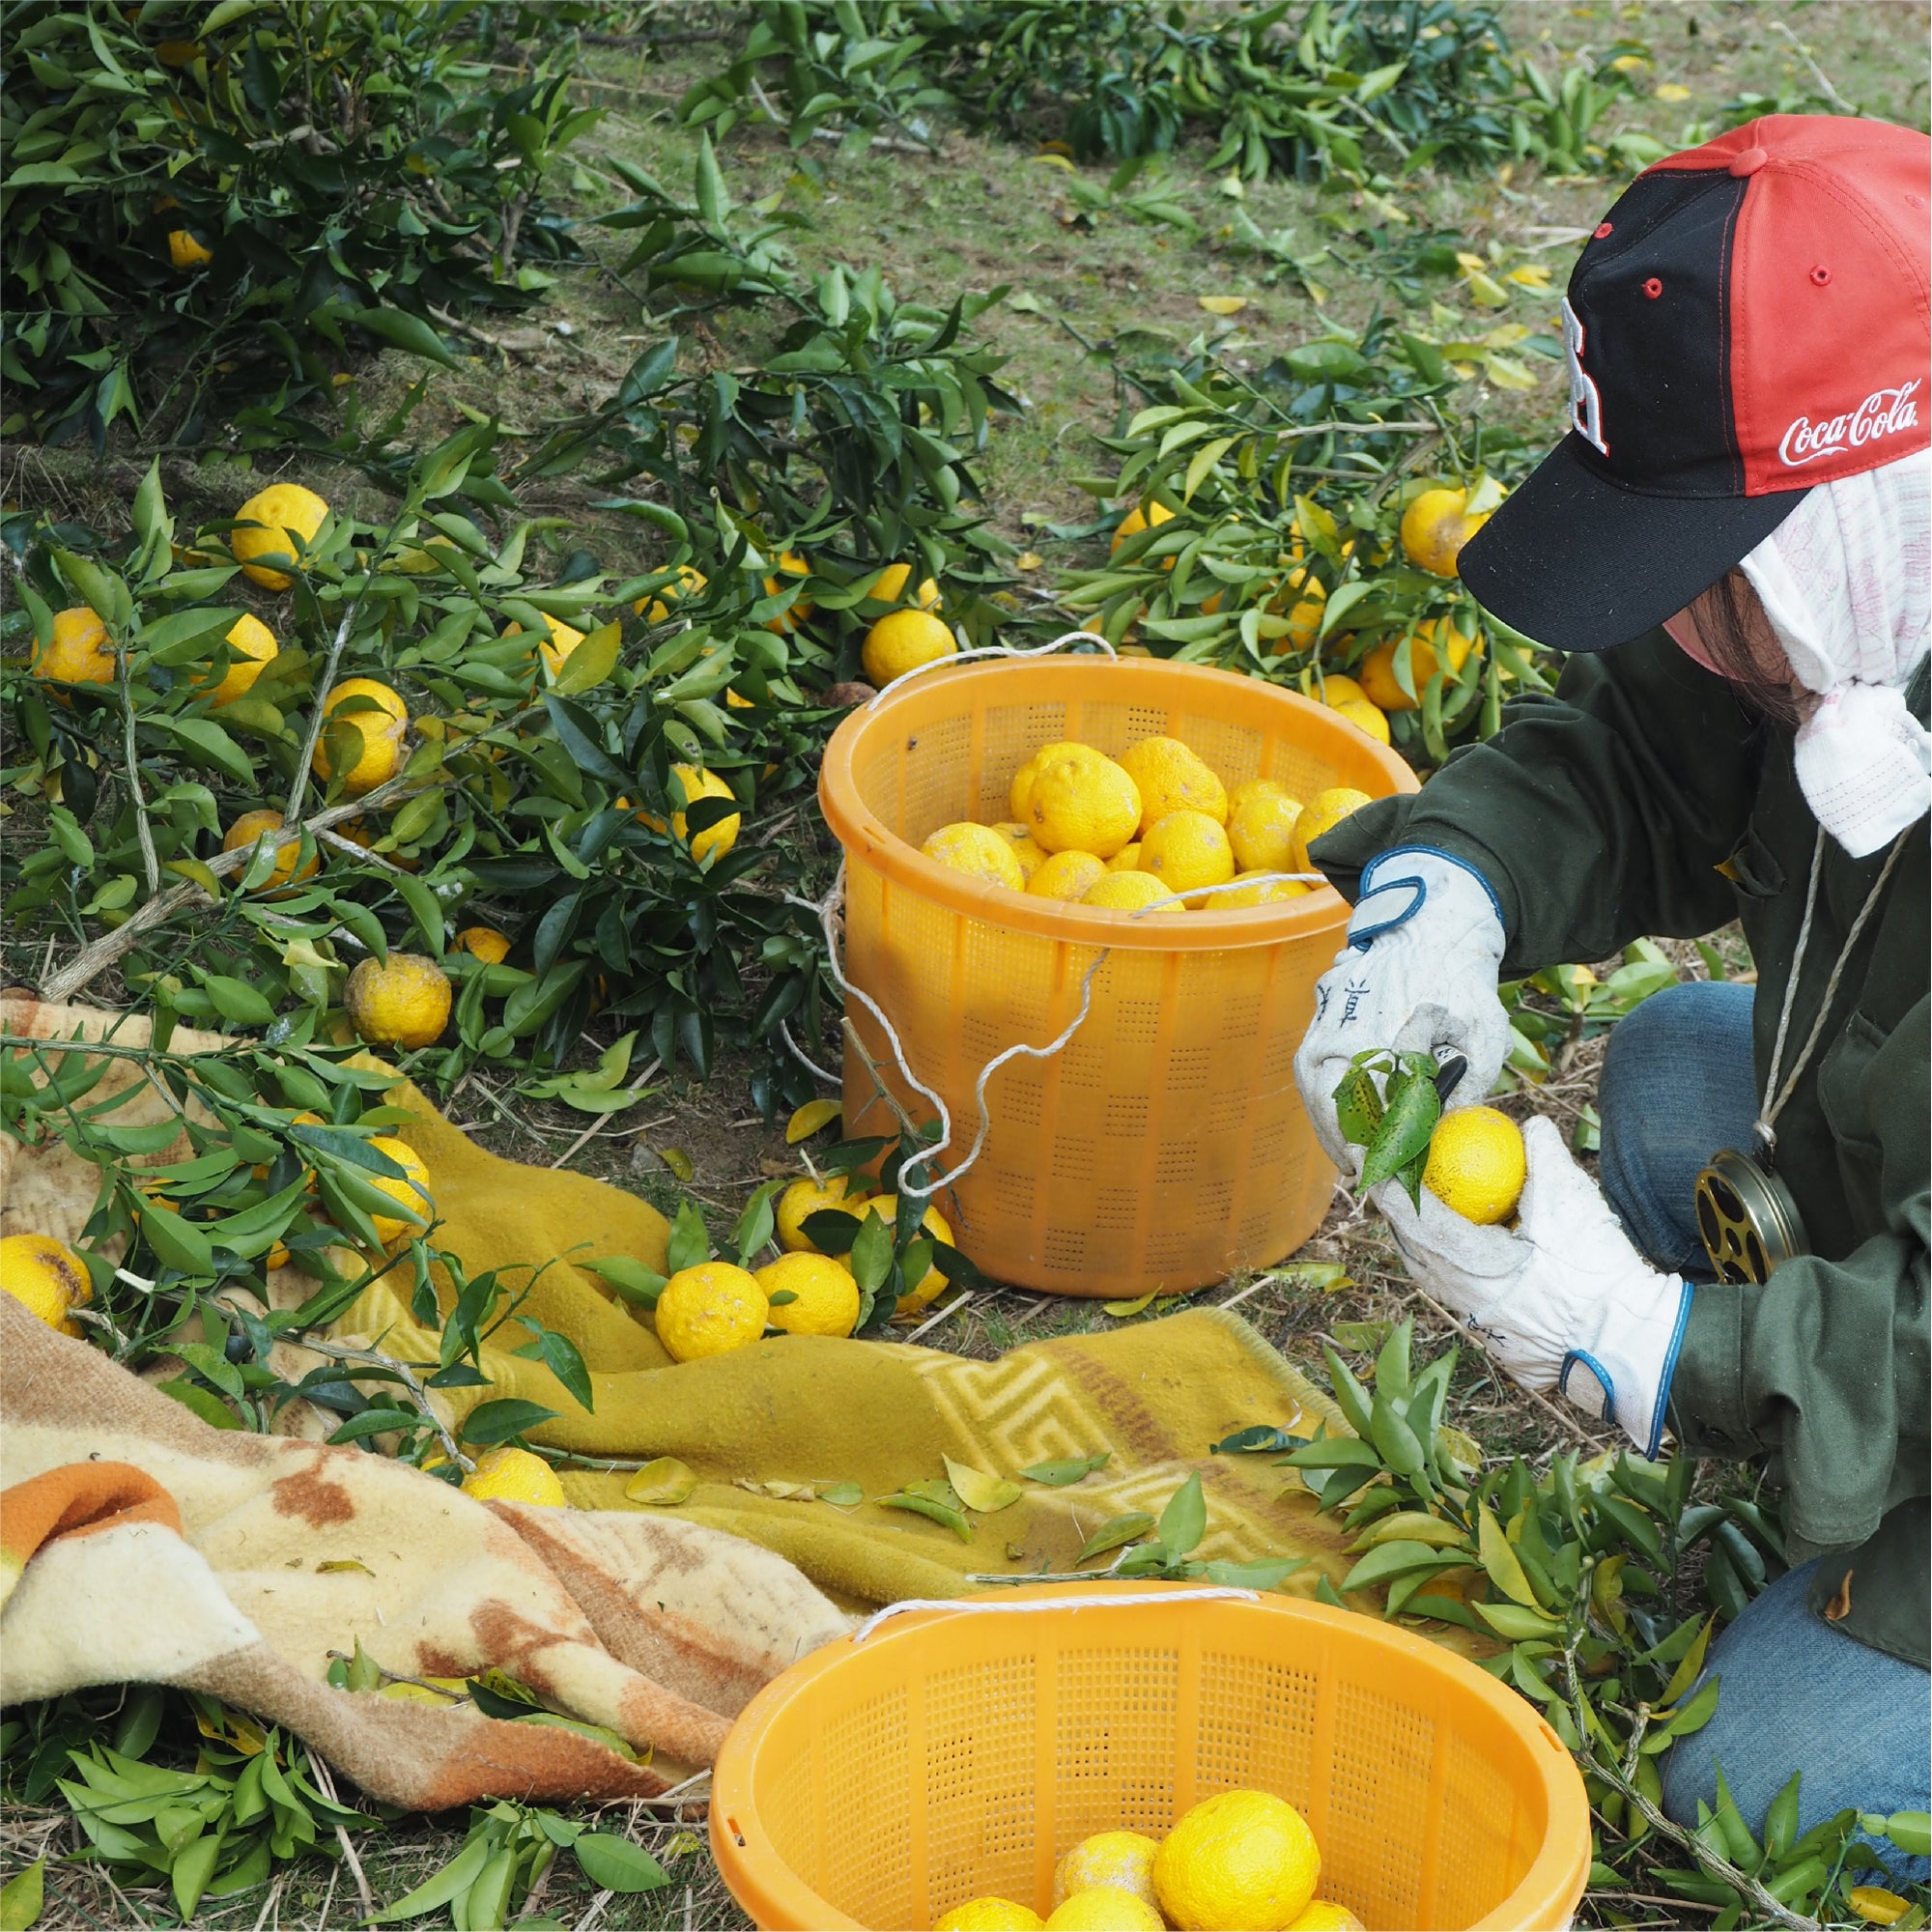 Farmer hand picking and trimming yuzu for yuzuco at an orchard in Japan